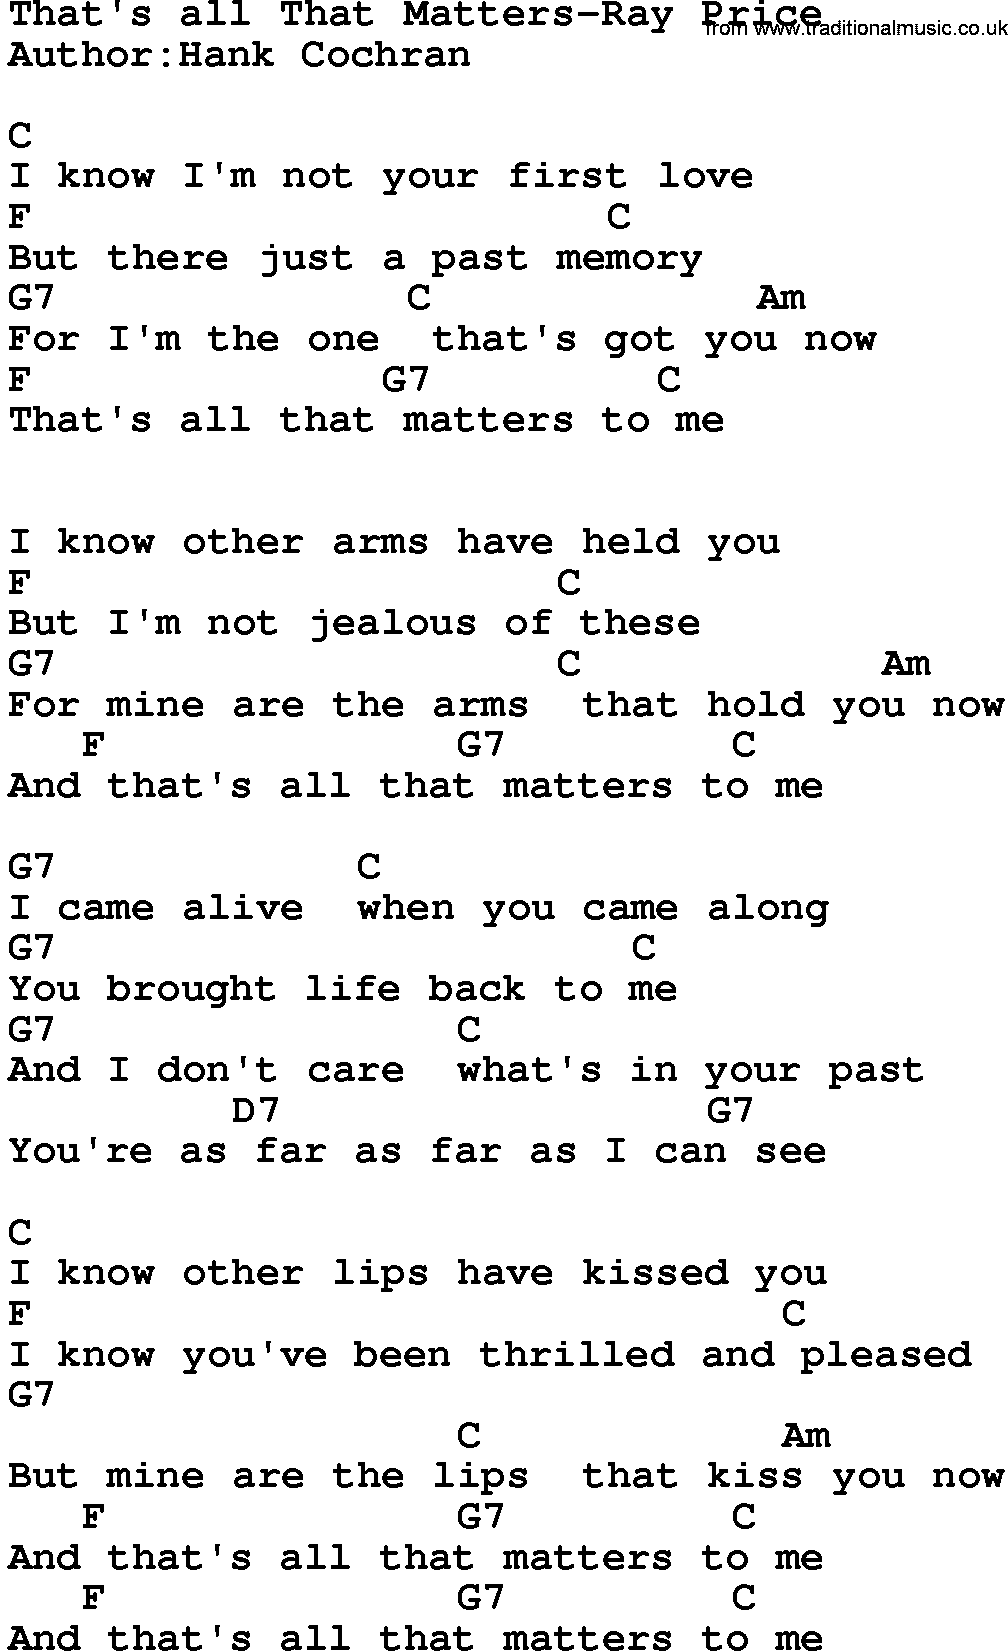 Country music song: That's All That Matters-Ray Price lyrics and chords